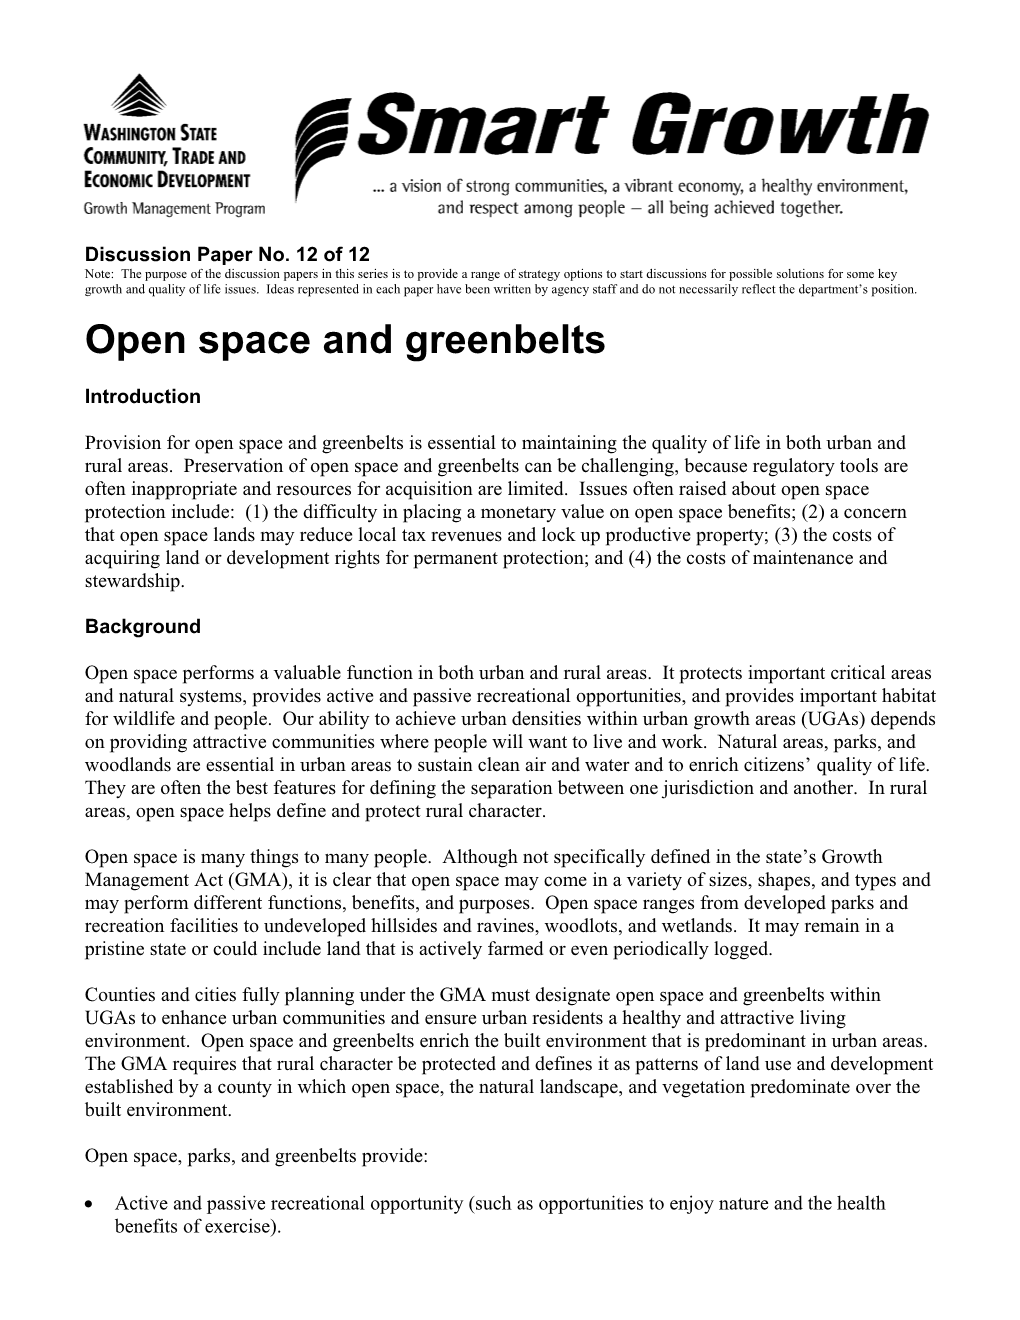 Open Space and Greenbelts